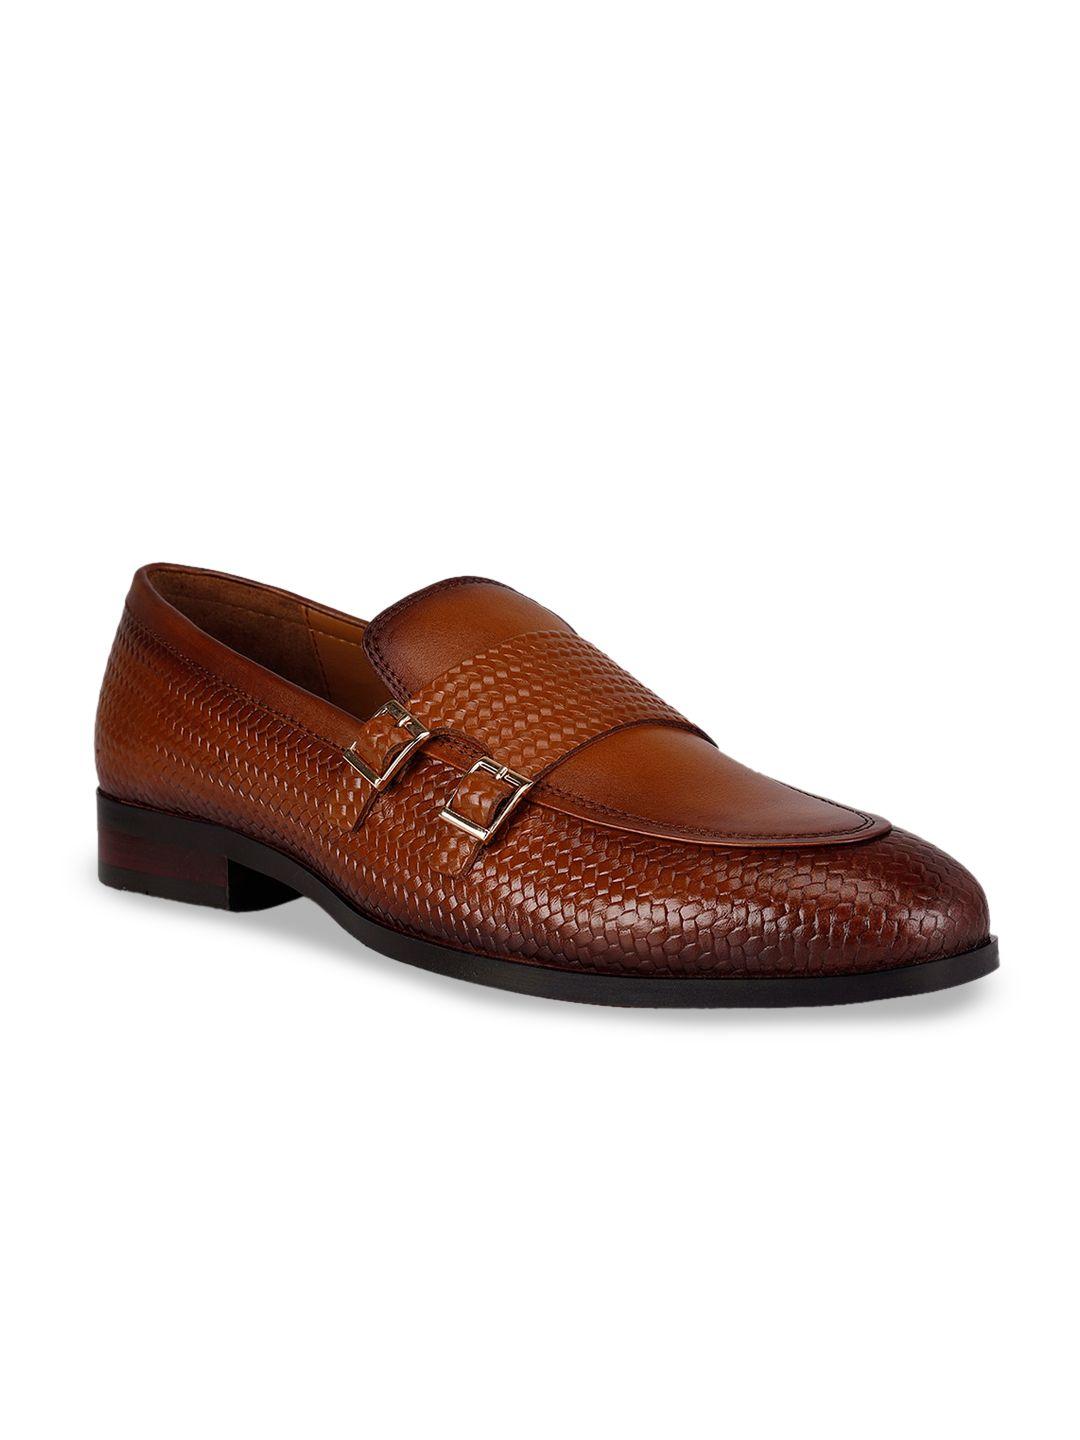 rosso-brunello-men-textured-leather-formal-double-monk-shoes